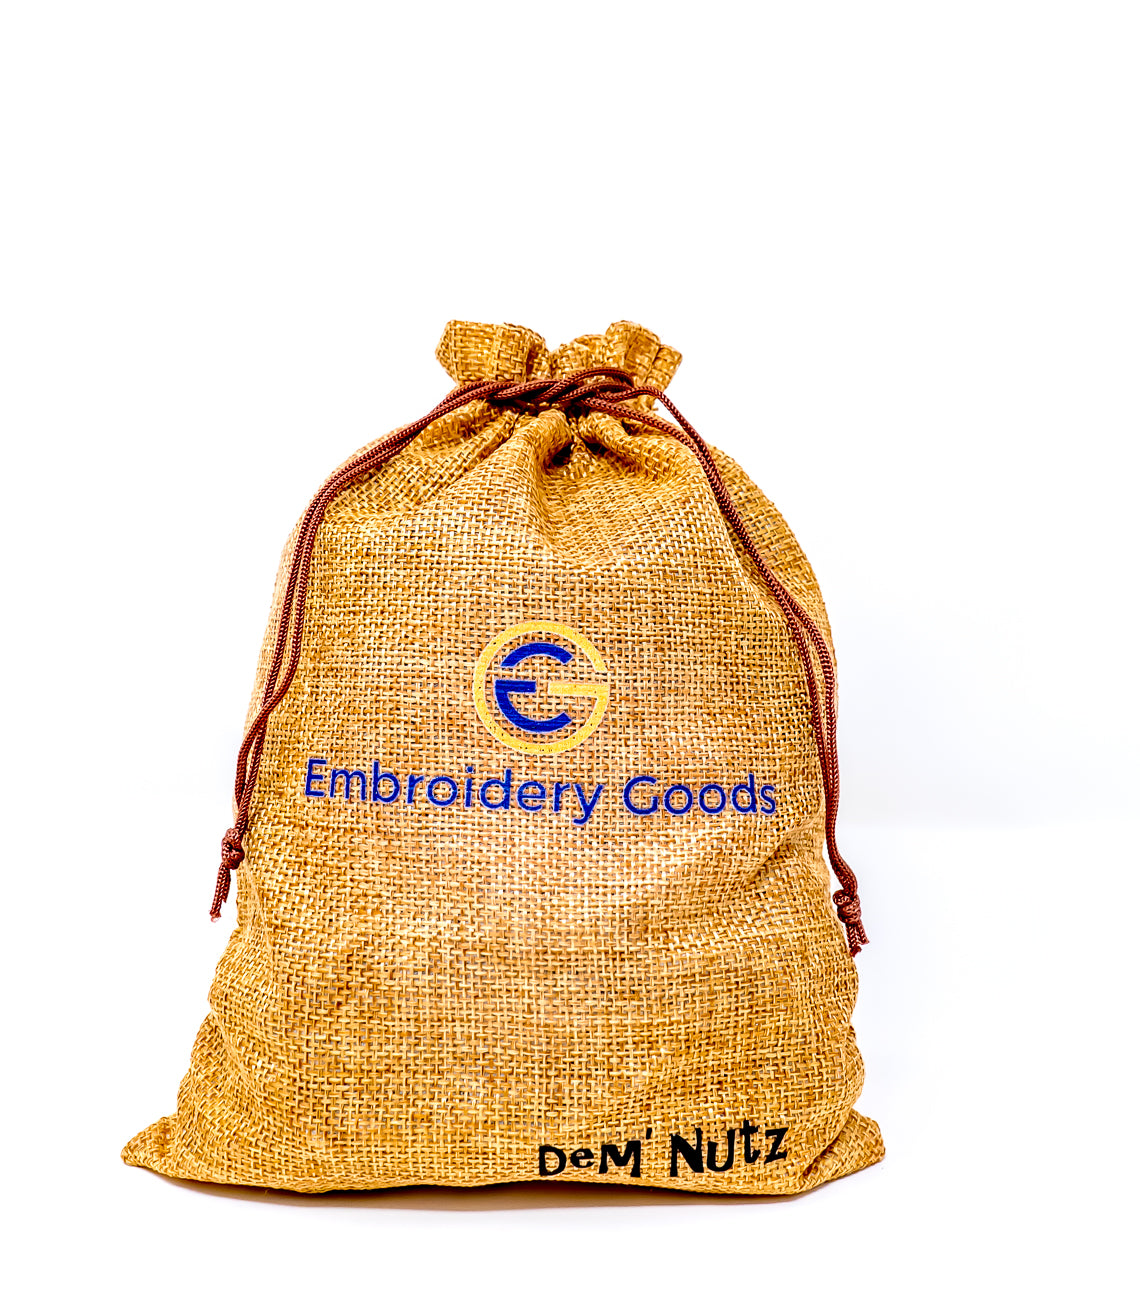 Corporate Nut Sack Gift Sets